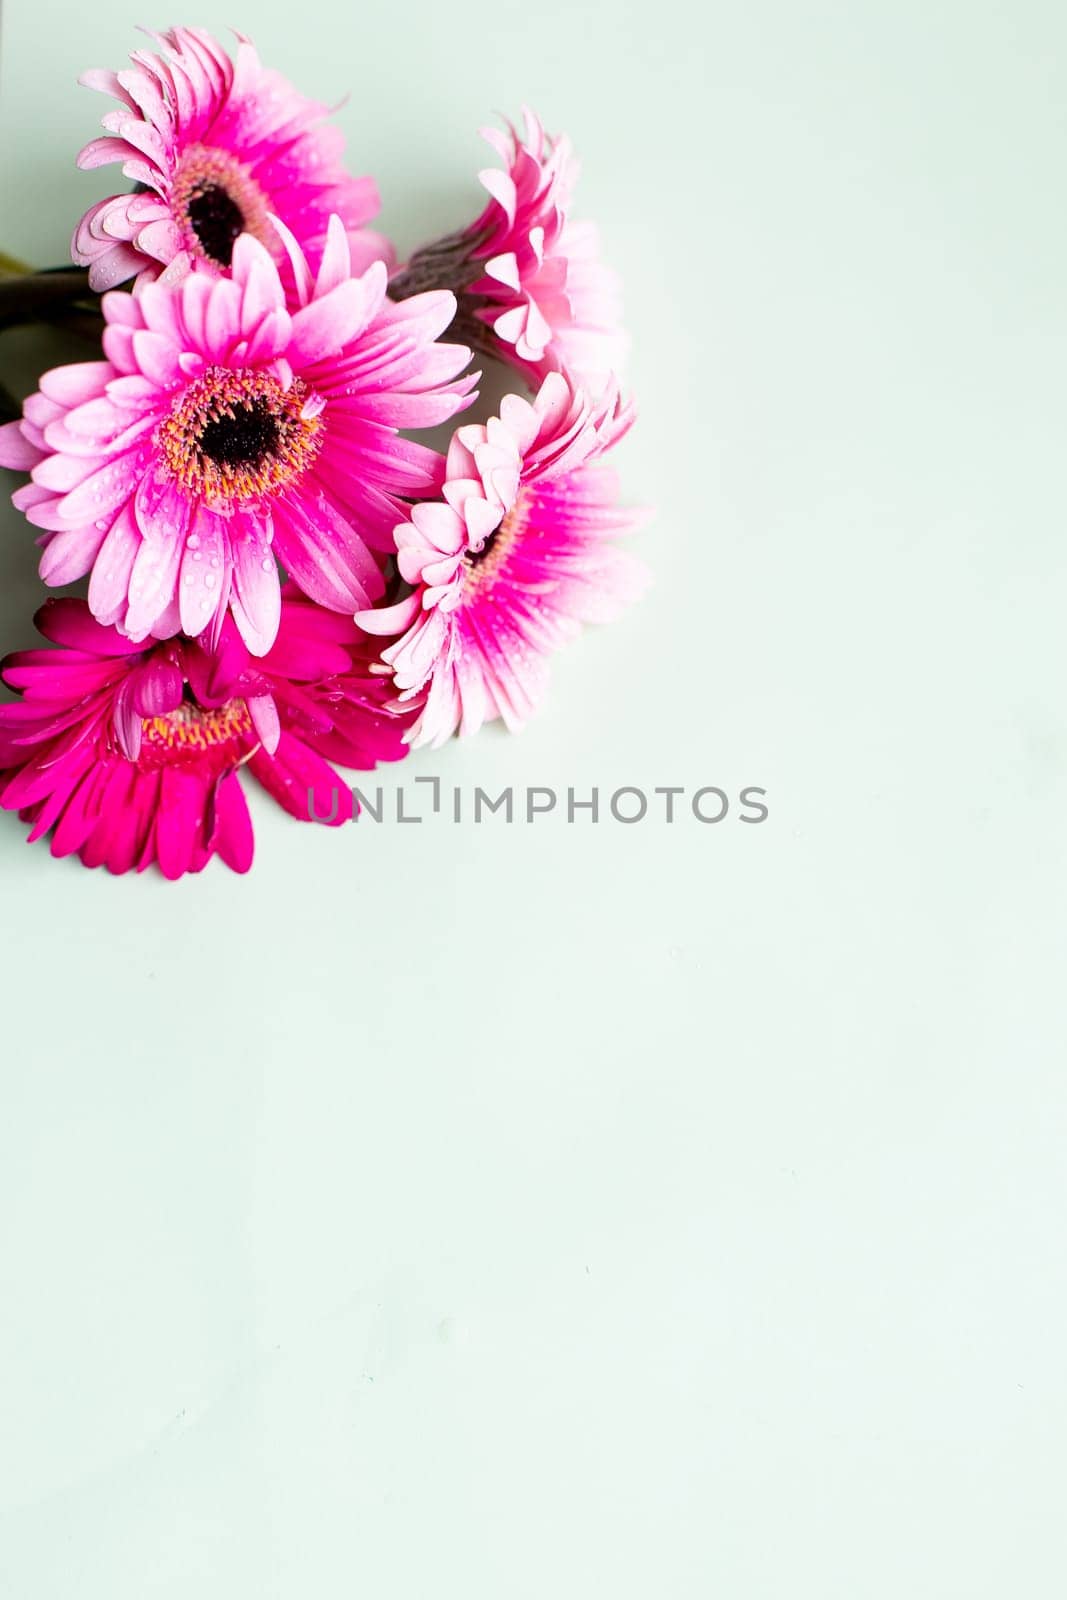 pink gerbera daisy in a basket and a White heart on blue wood, lovely background for Valentines Day, Birthday, Anniversary or floral greeting card.